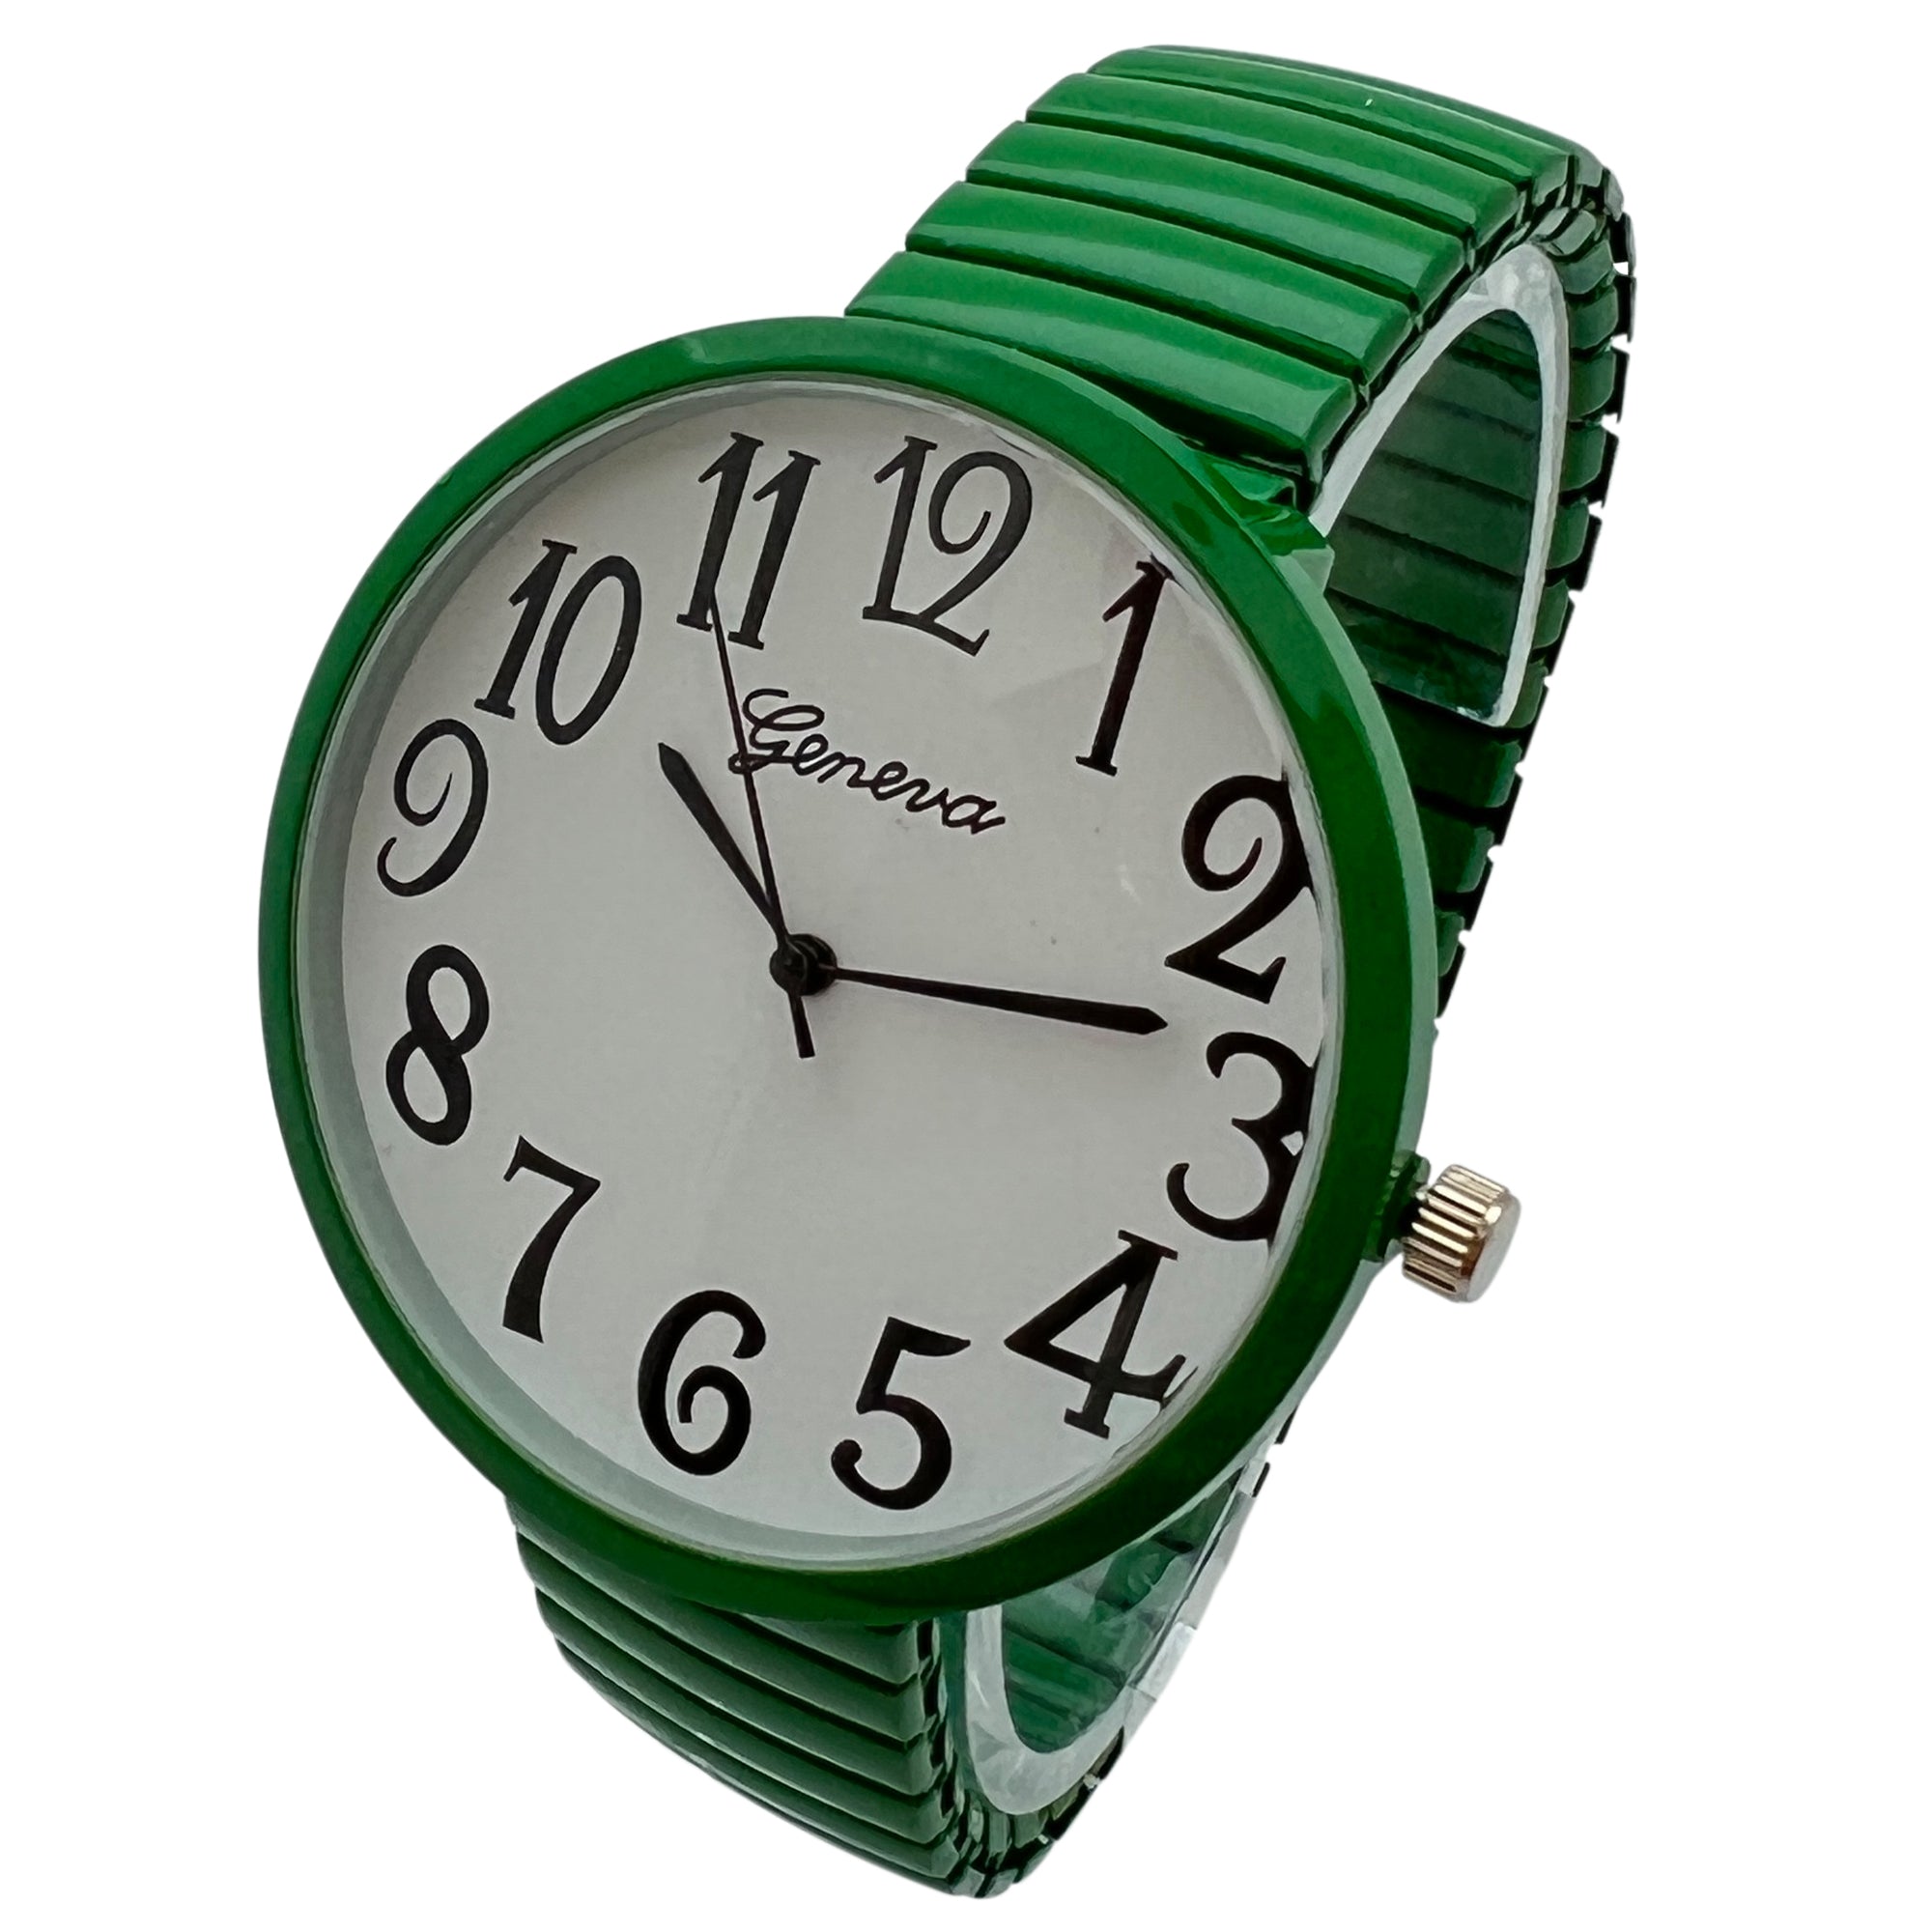 6 Large Face Stretch Watch